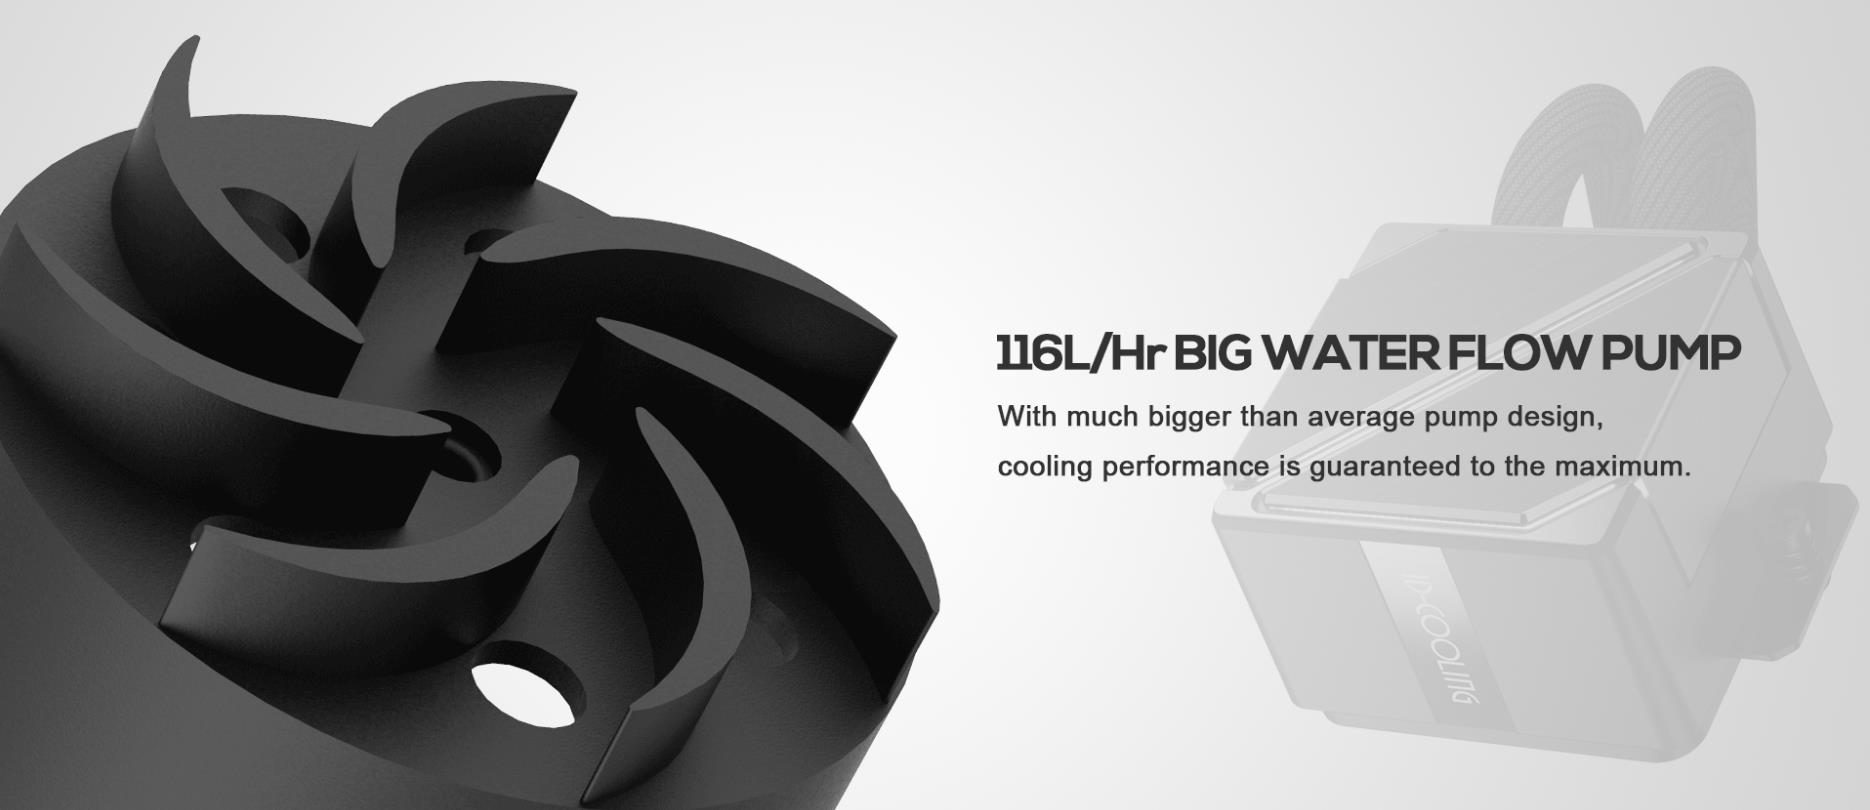 A large marketing image providing additional information about the product ID-COOLING DashFlow 360 Basic 360mm AIO CPU Cooler - Black - Additional alt info not provided